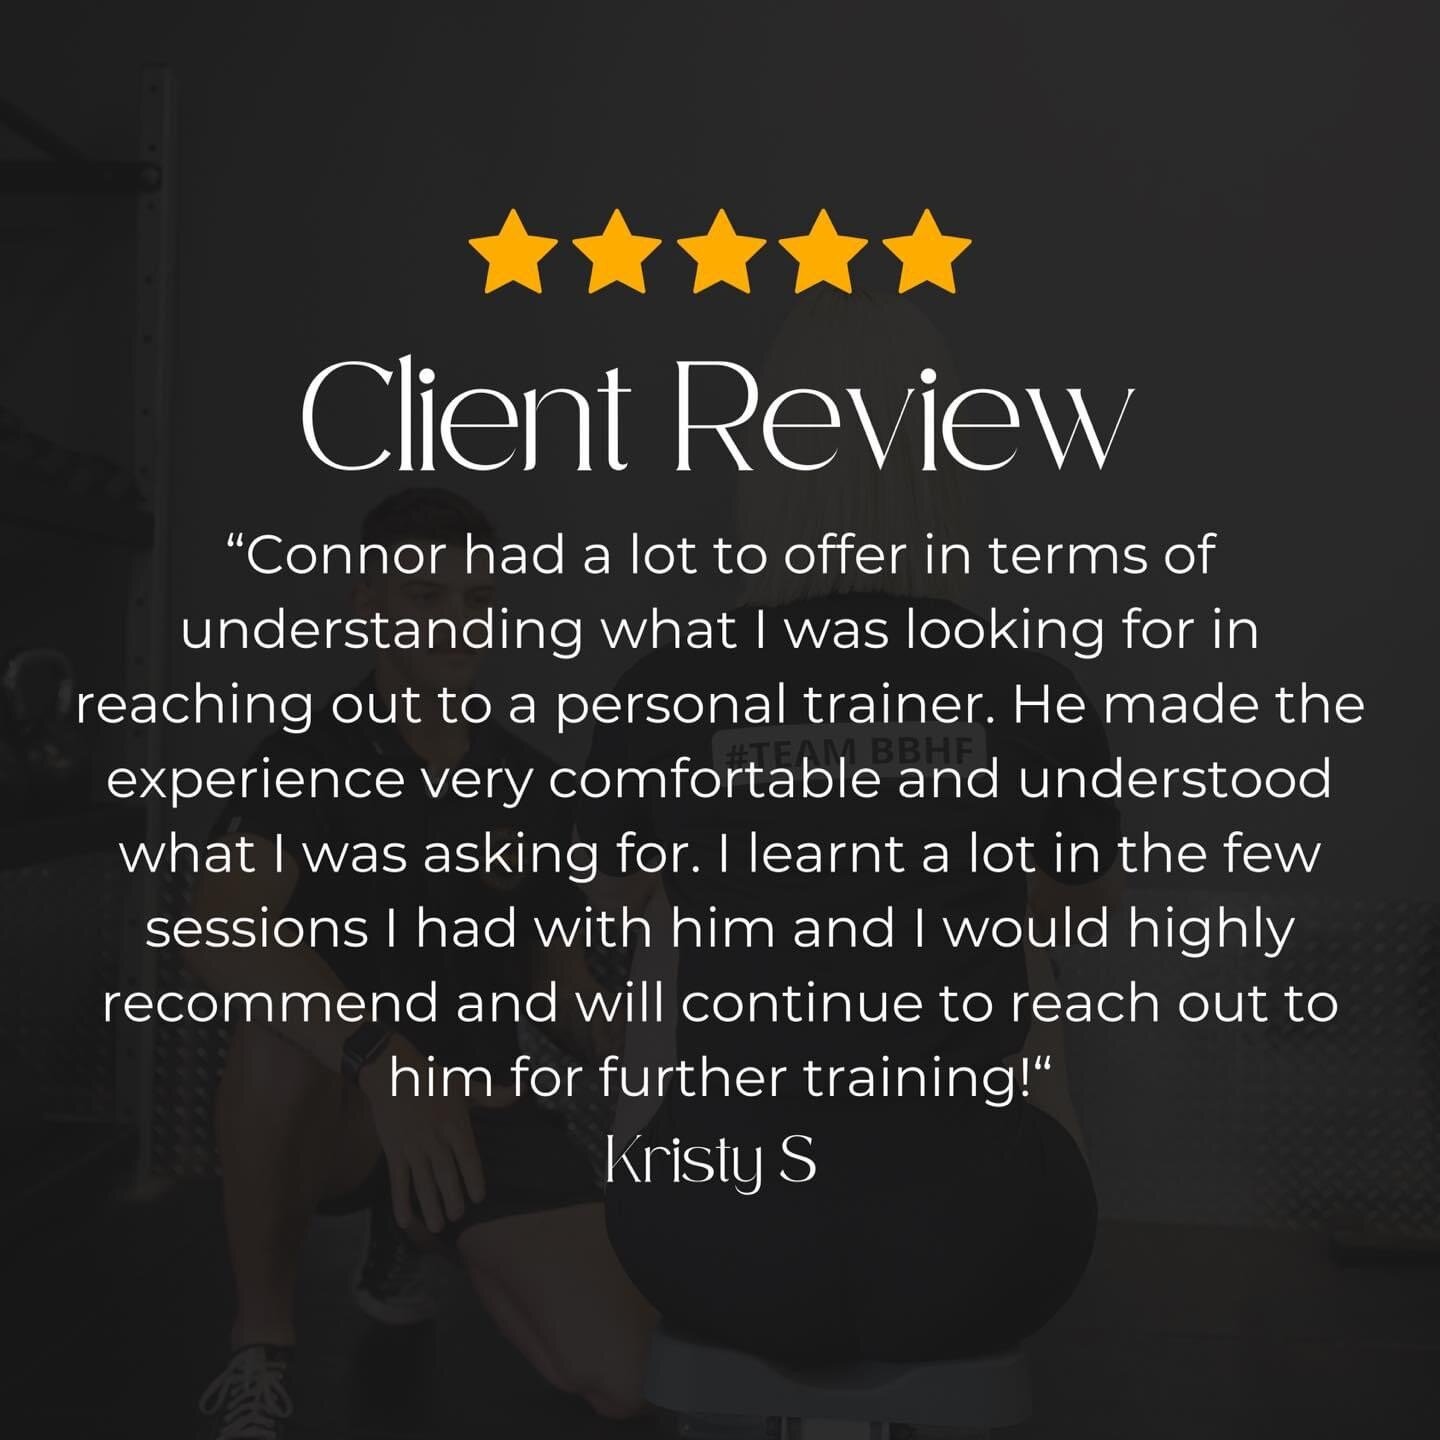 🙌🏼 Another happy customer! 🙌🏼

Honoured and thrilled to share this incredible testimonial from a valued client! Your success story is what keeps us motivated to push harder and aim higher.
Thank you for letting us be part of your fitness journey.